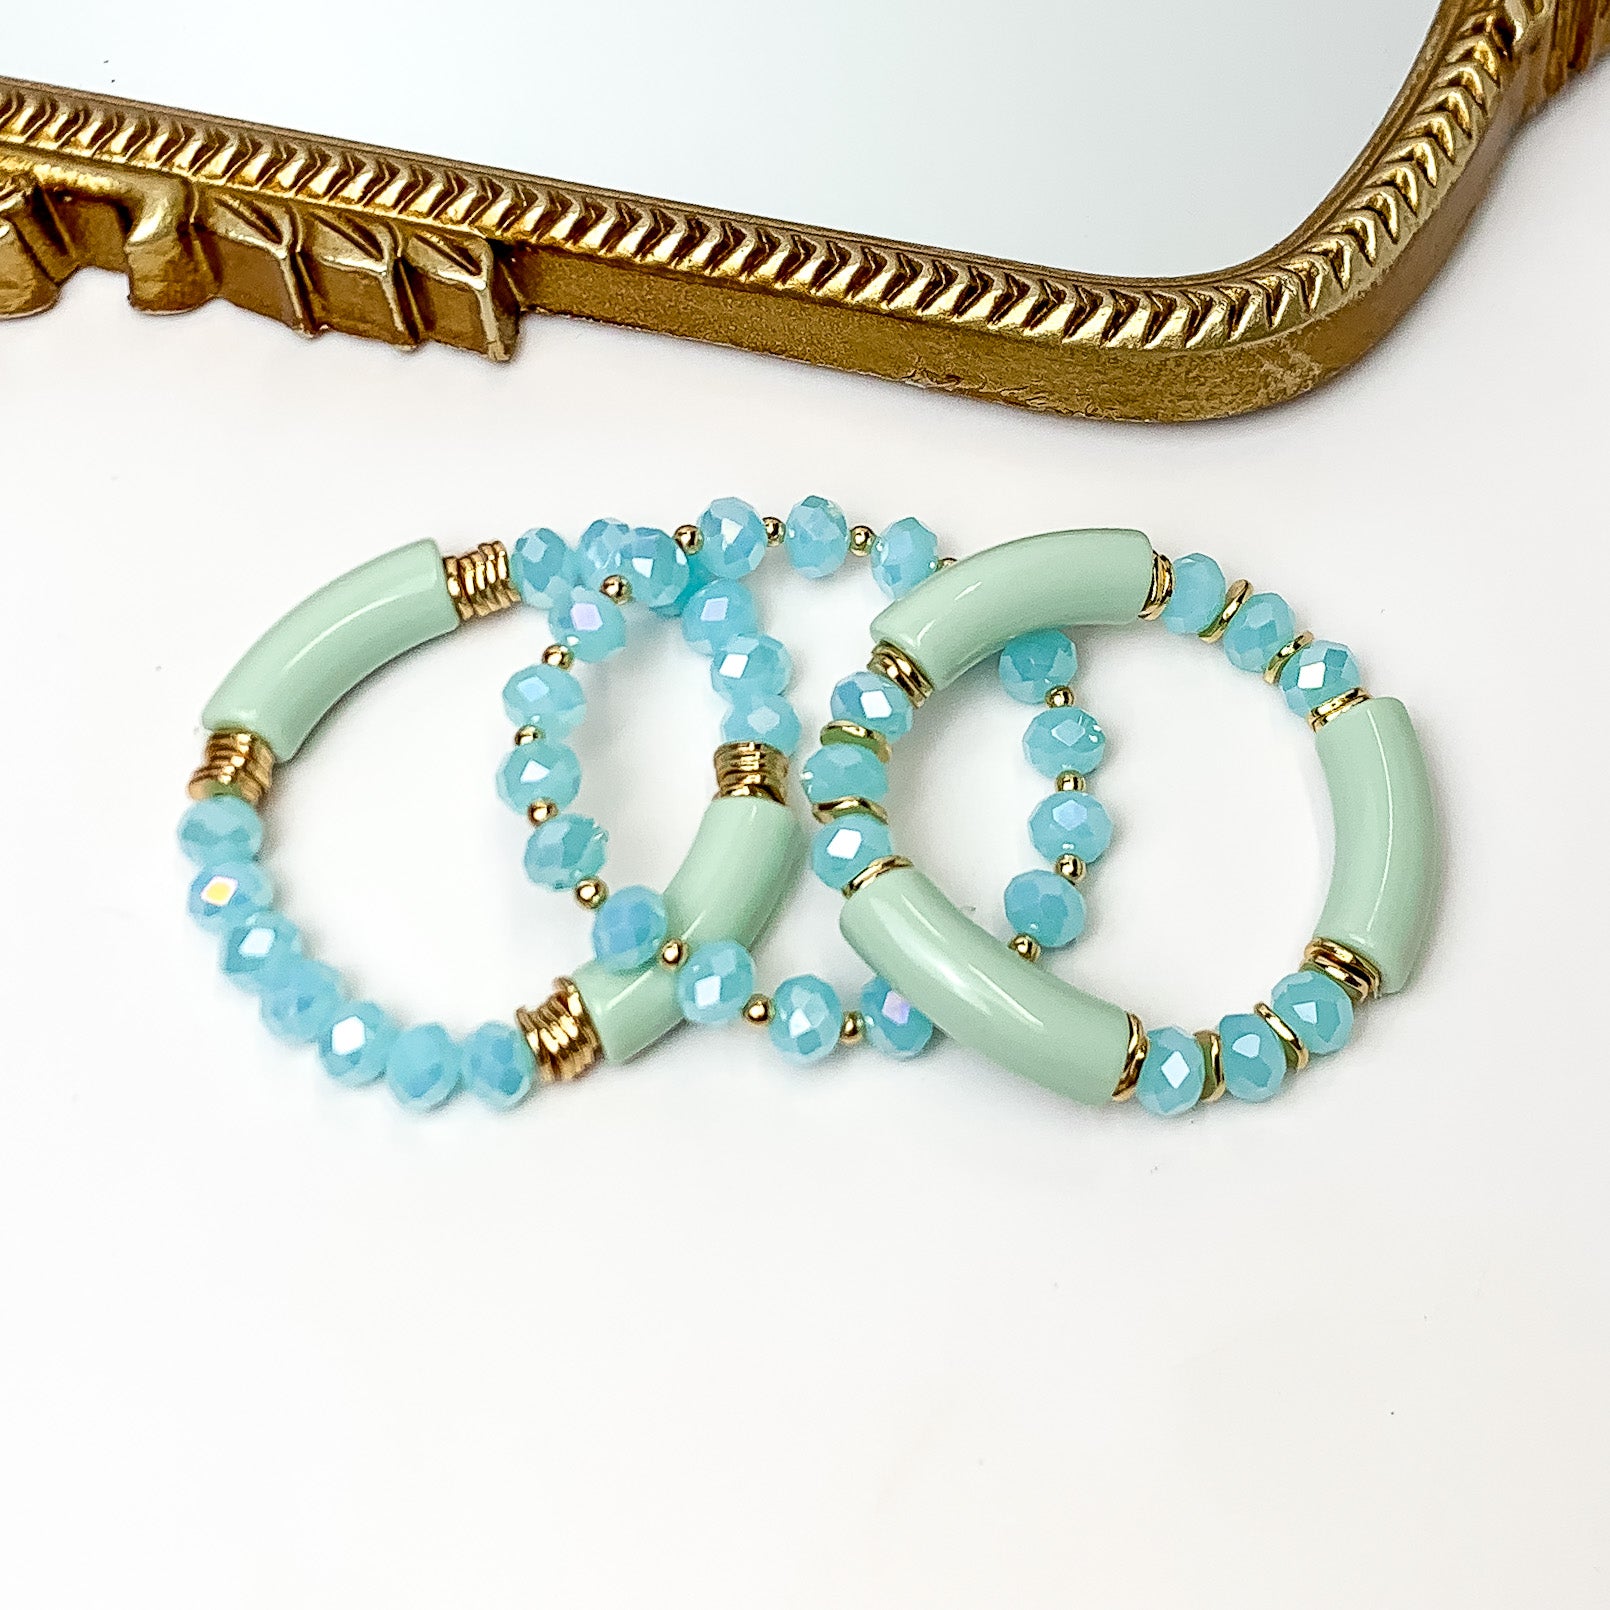 Set of Three | Sunny Bliss Crystal Beaded Bracelet Set in Light Blue. Pictured on a white background with a gold frame mirror at the top.